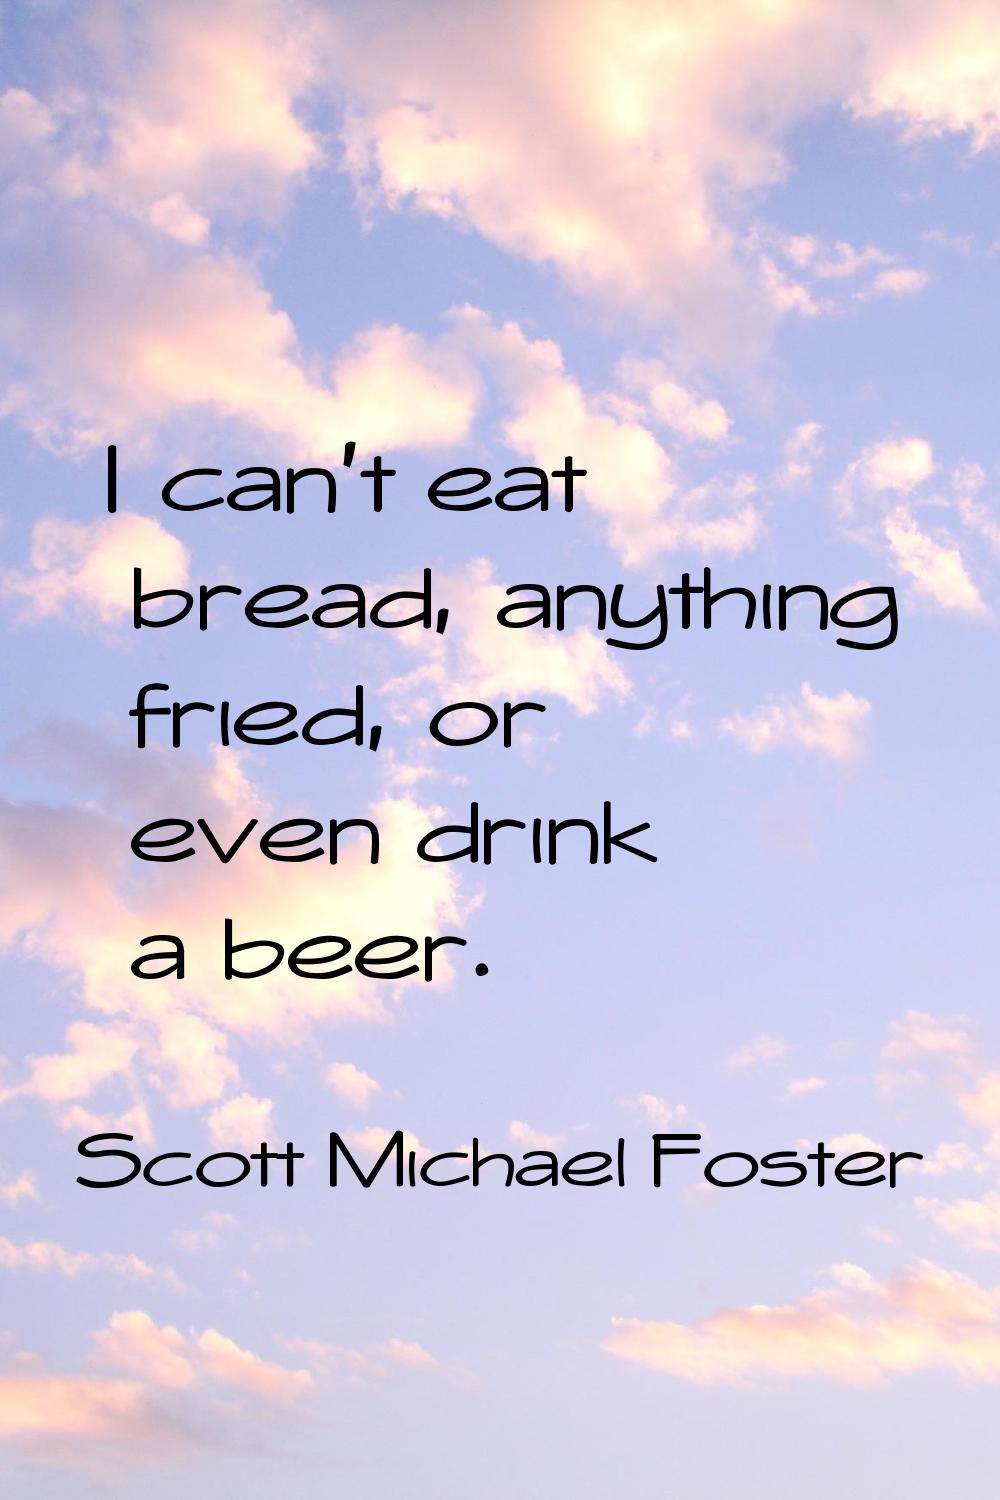 I can't eat bread, anything fried, or even drink a beer.